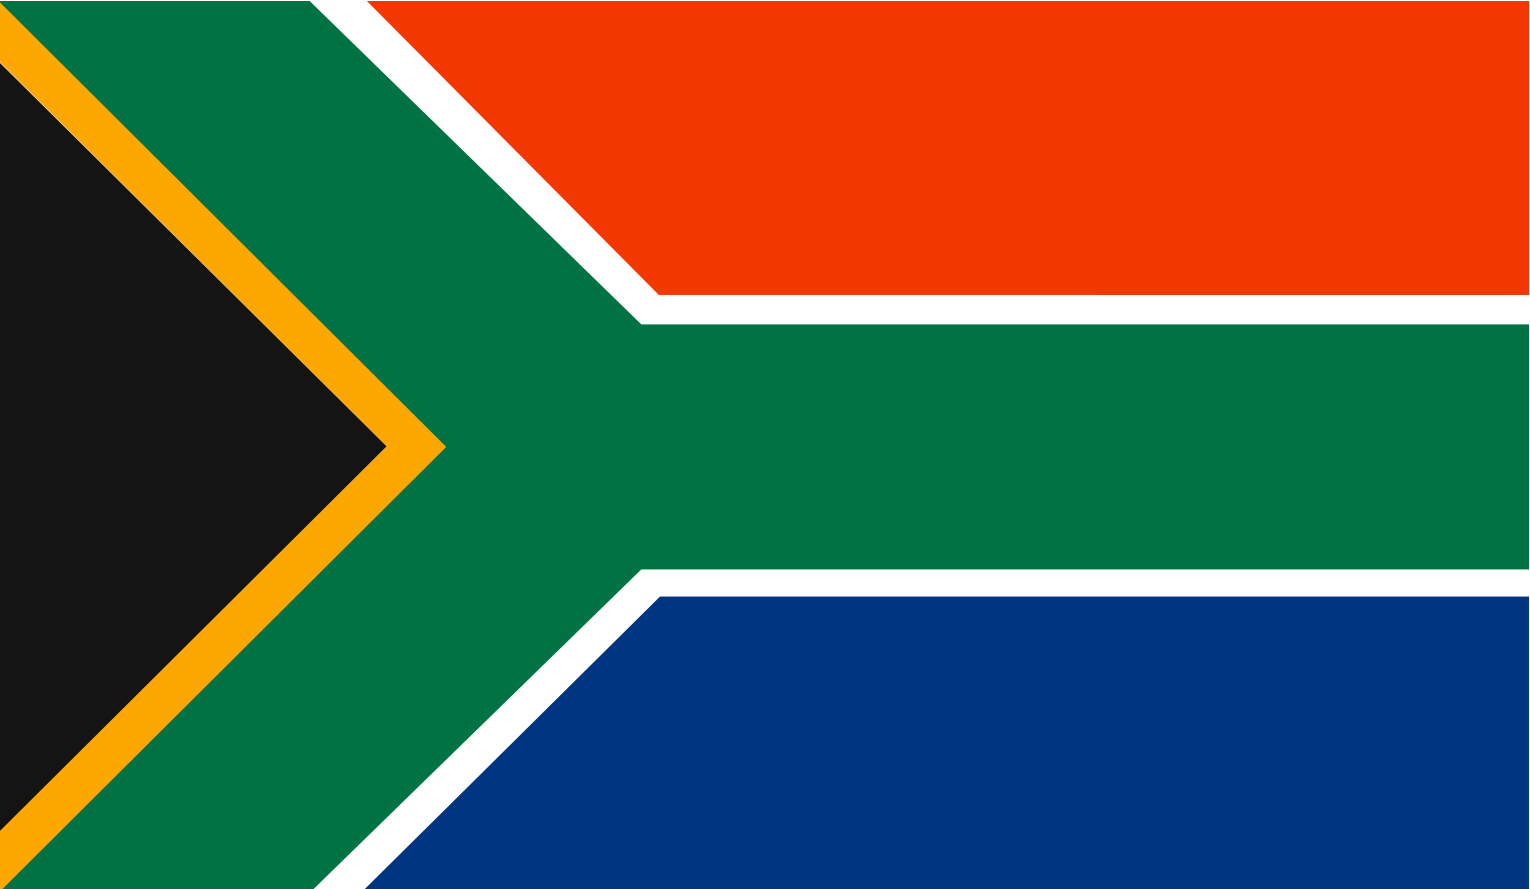 South Africa Mission Trip: South Africa's Flag